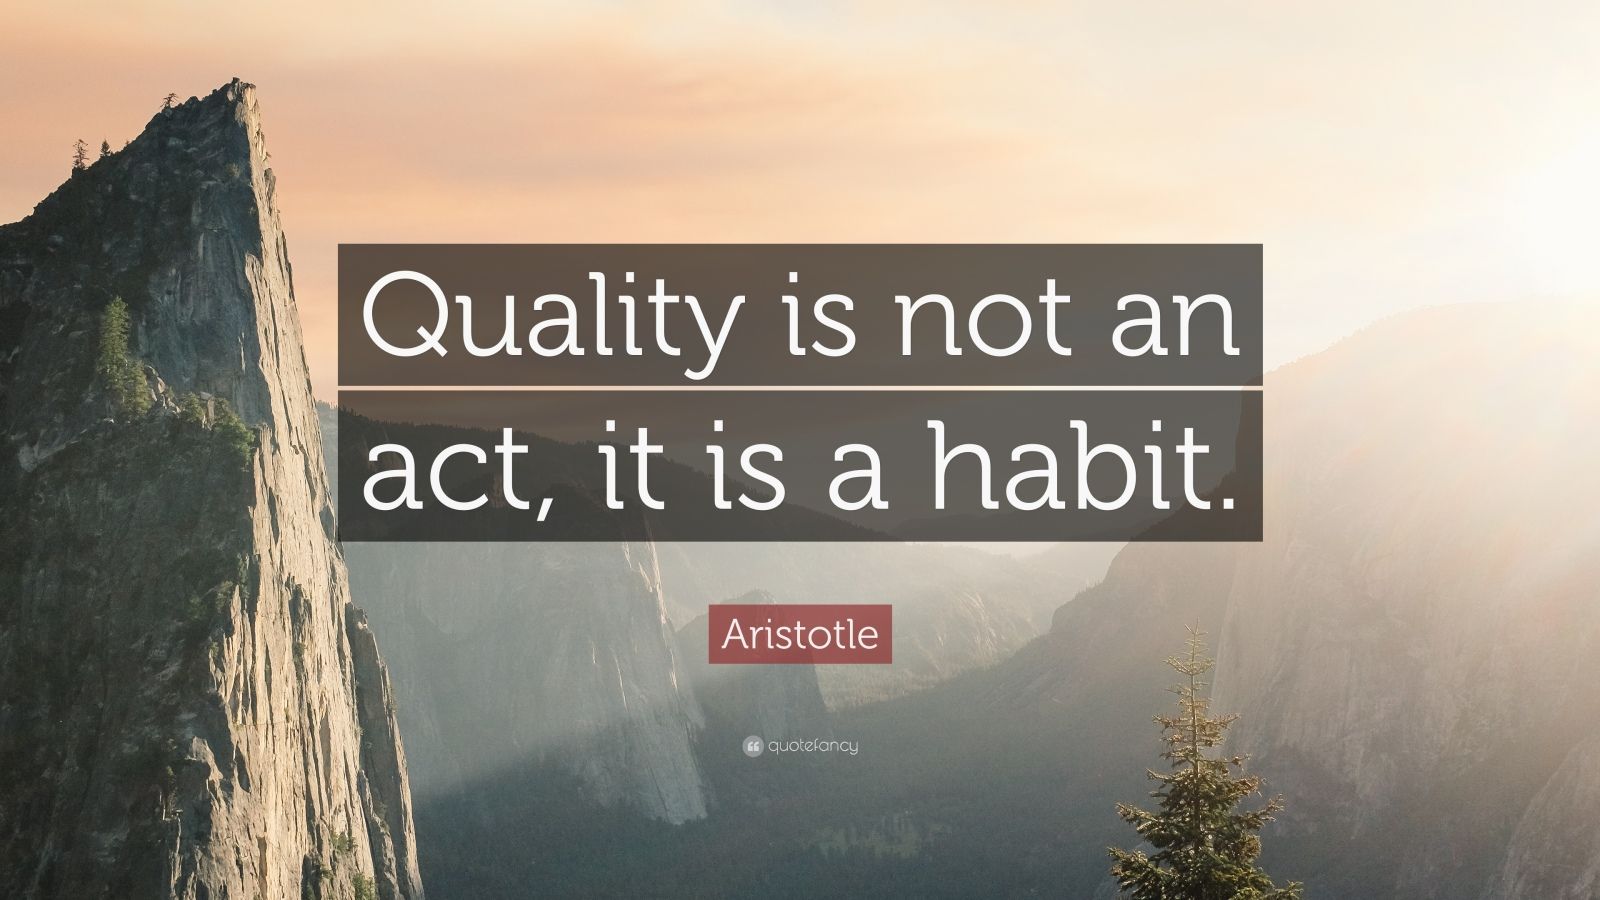 Aristotle Quote: “Quality is not an act, it is a habit.”